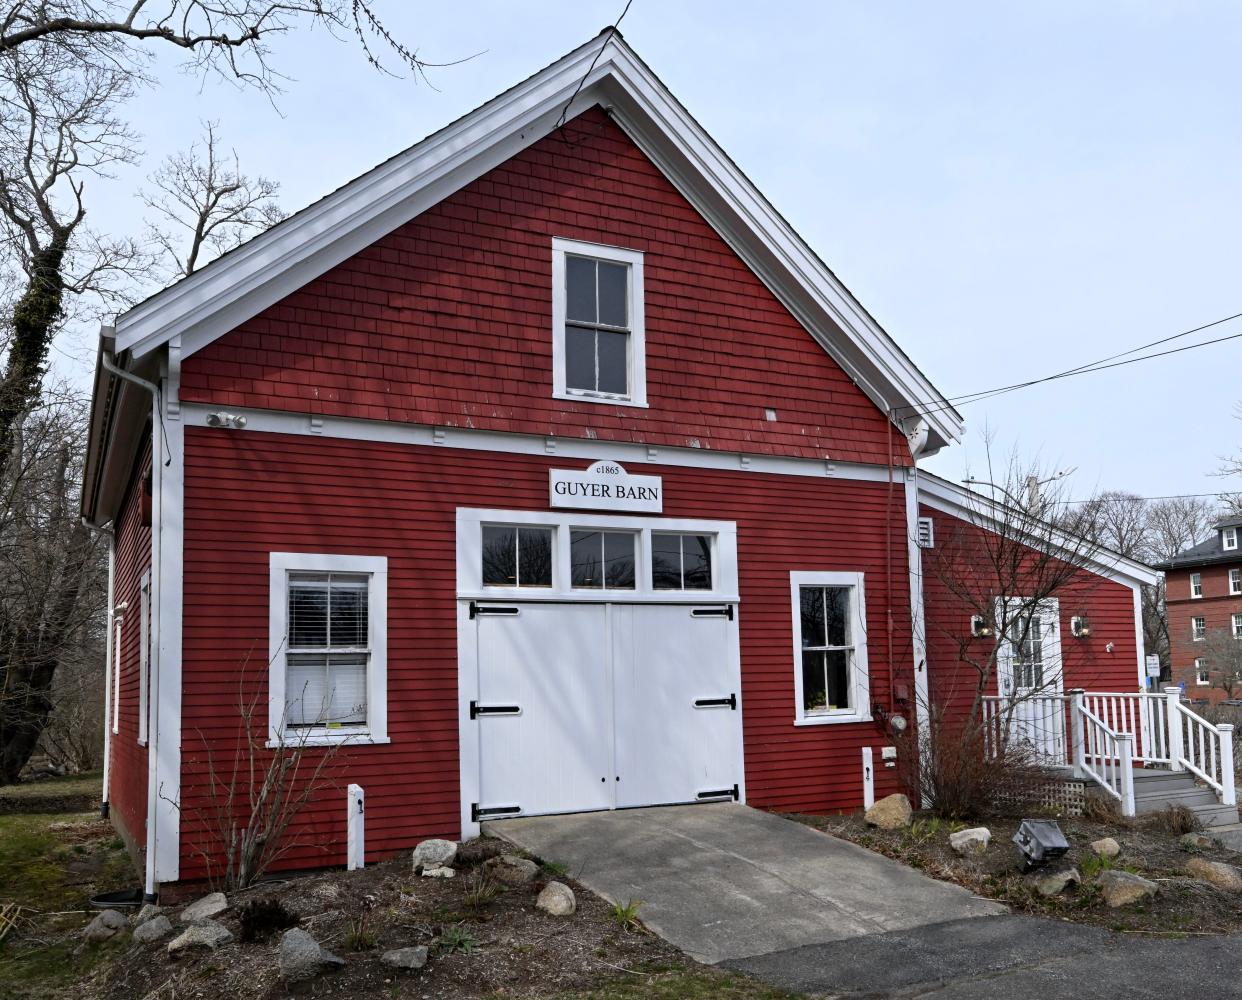 HyArts Programming Annex in Hyannis is a joint program of the Cultural Center of Cape Cod and the Town of Barnstable.